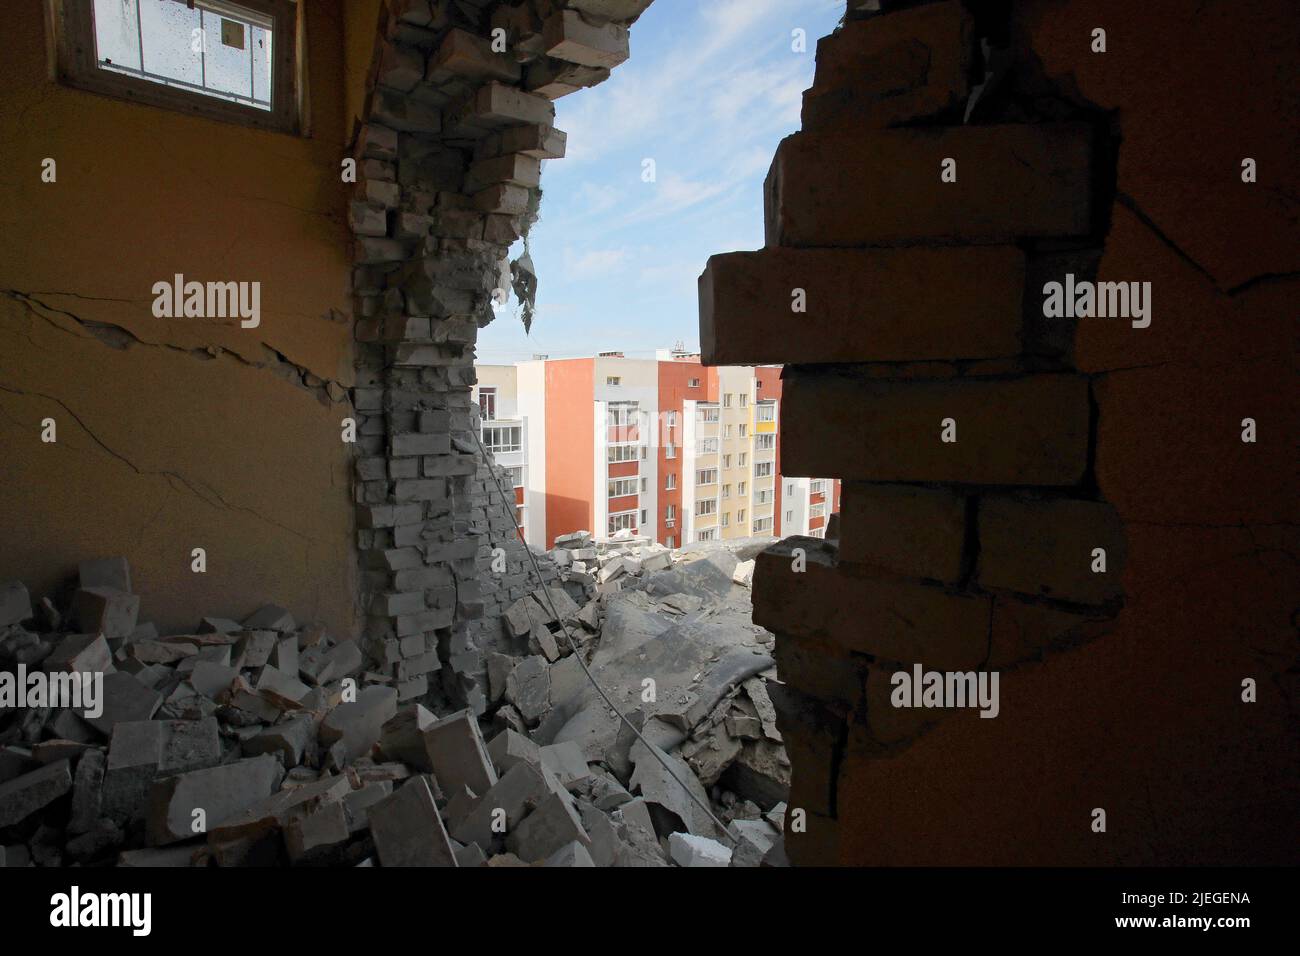 An apartment block is seen through a hole in the wall after the Russian troops shelled a northern neighbourhood with a BM-30 Smerch multiple rocket launcher, Kharkiv, northeastern Ukraine, June 26, 2022. Photo by Vyacheslav Madiyevskyy/Ukrinform/ABACAPRESS.COM Stock Photo